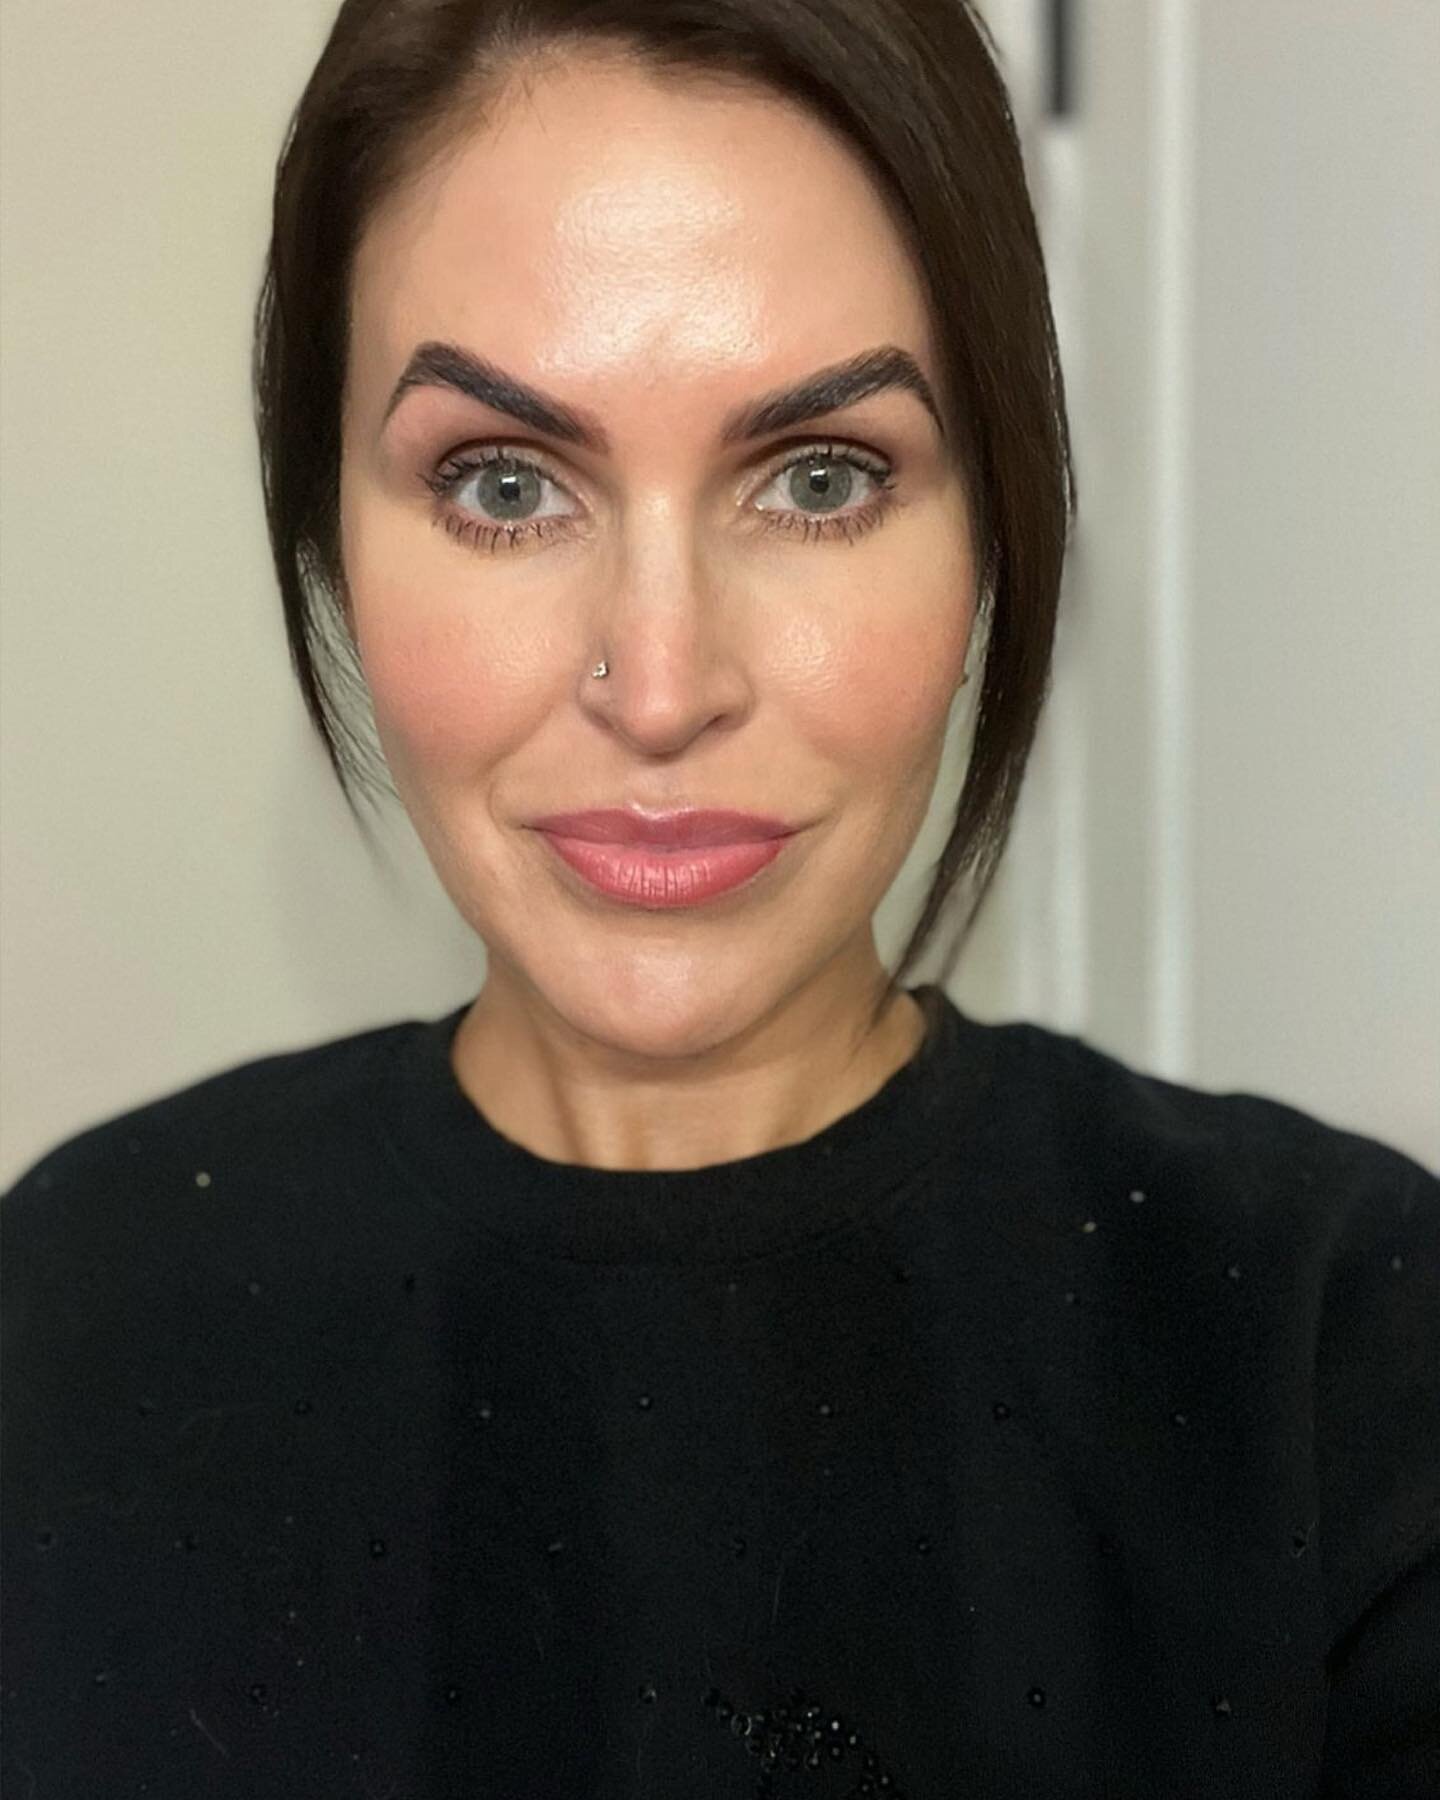 Freshly Laminated, tinted, and waxed my own brows this evening! 
I always feel like a new person after brow day. Who&rsquo;s with me? 🙋🏻&zwj;♀️

A lot of people have the common misconception that laminated brows have one distinct look. That stick s